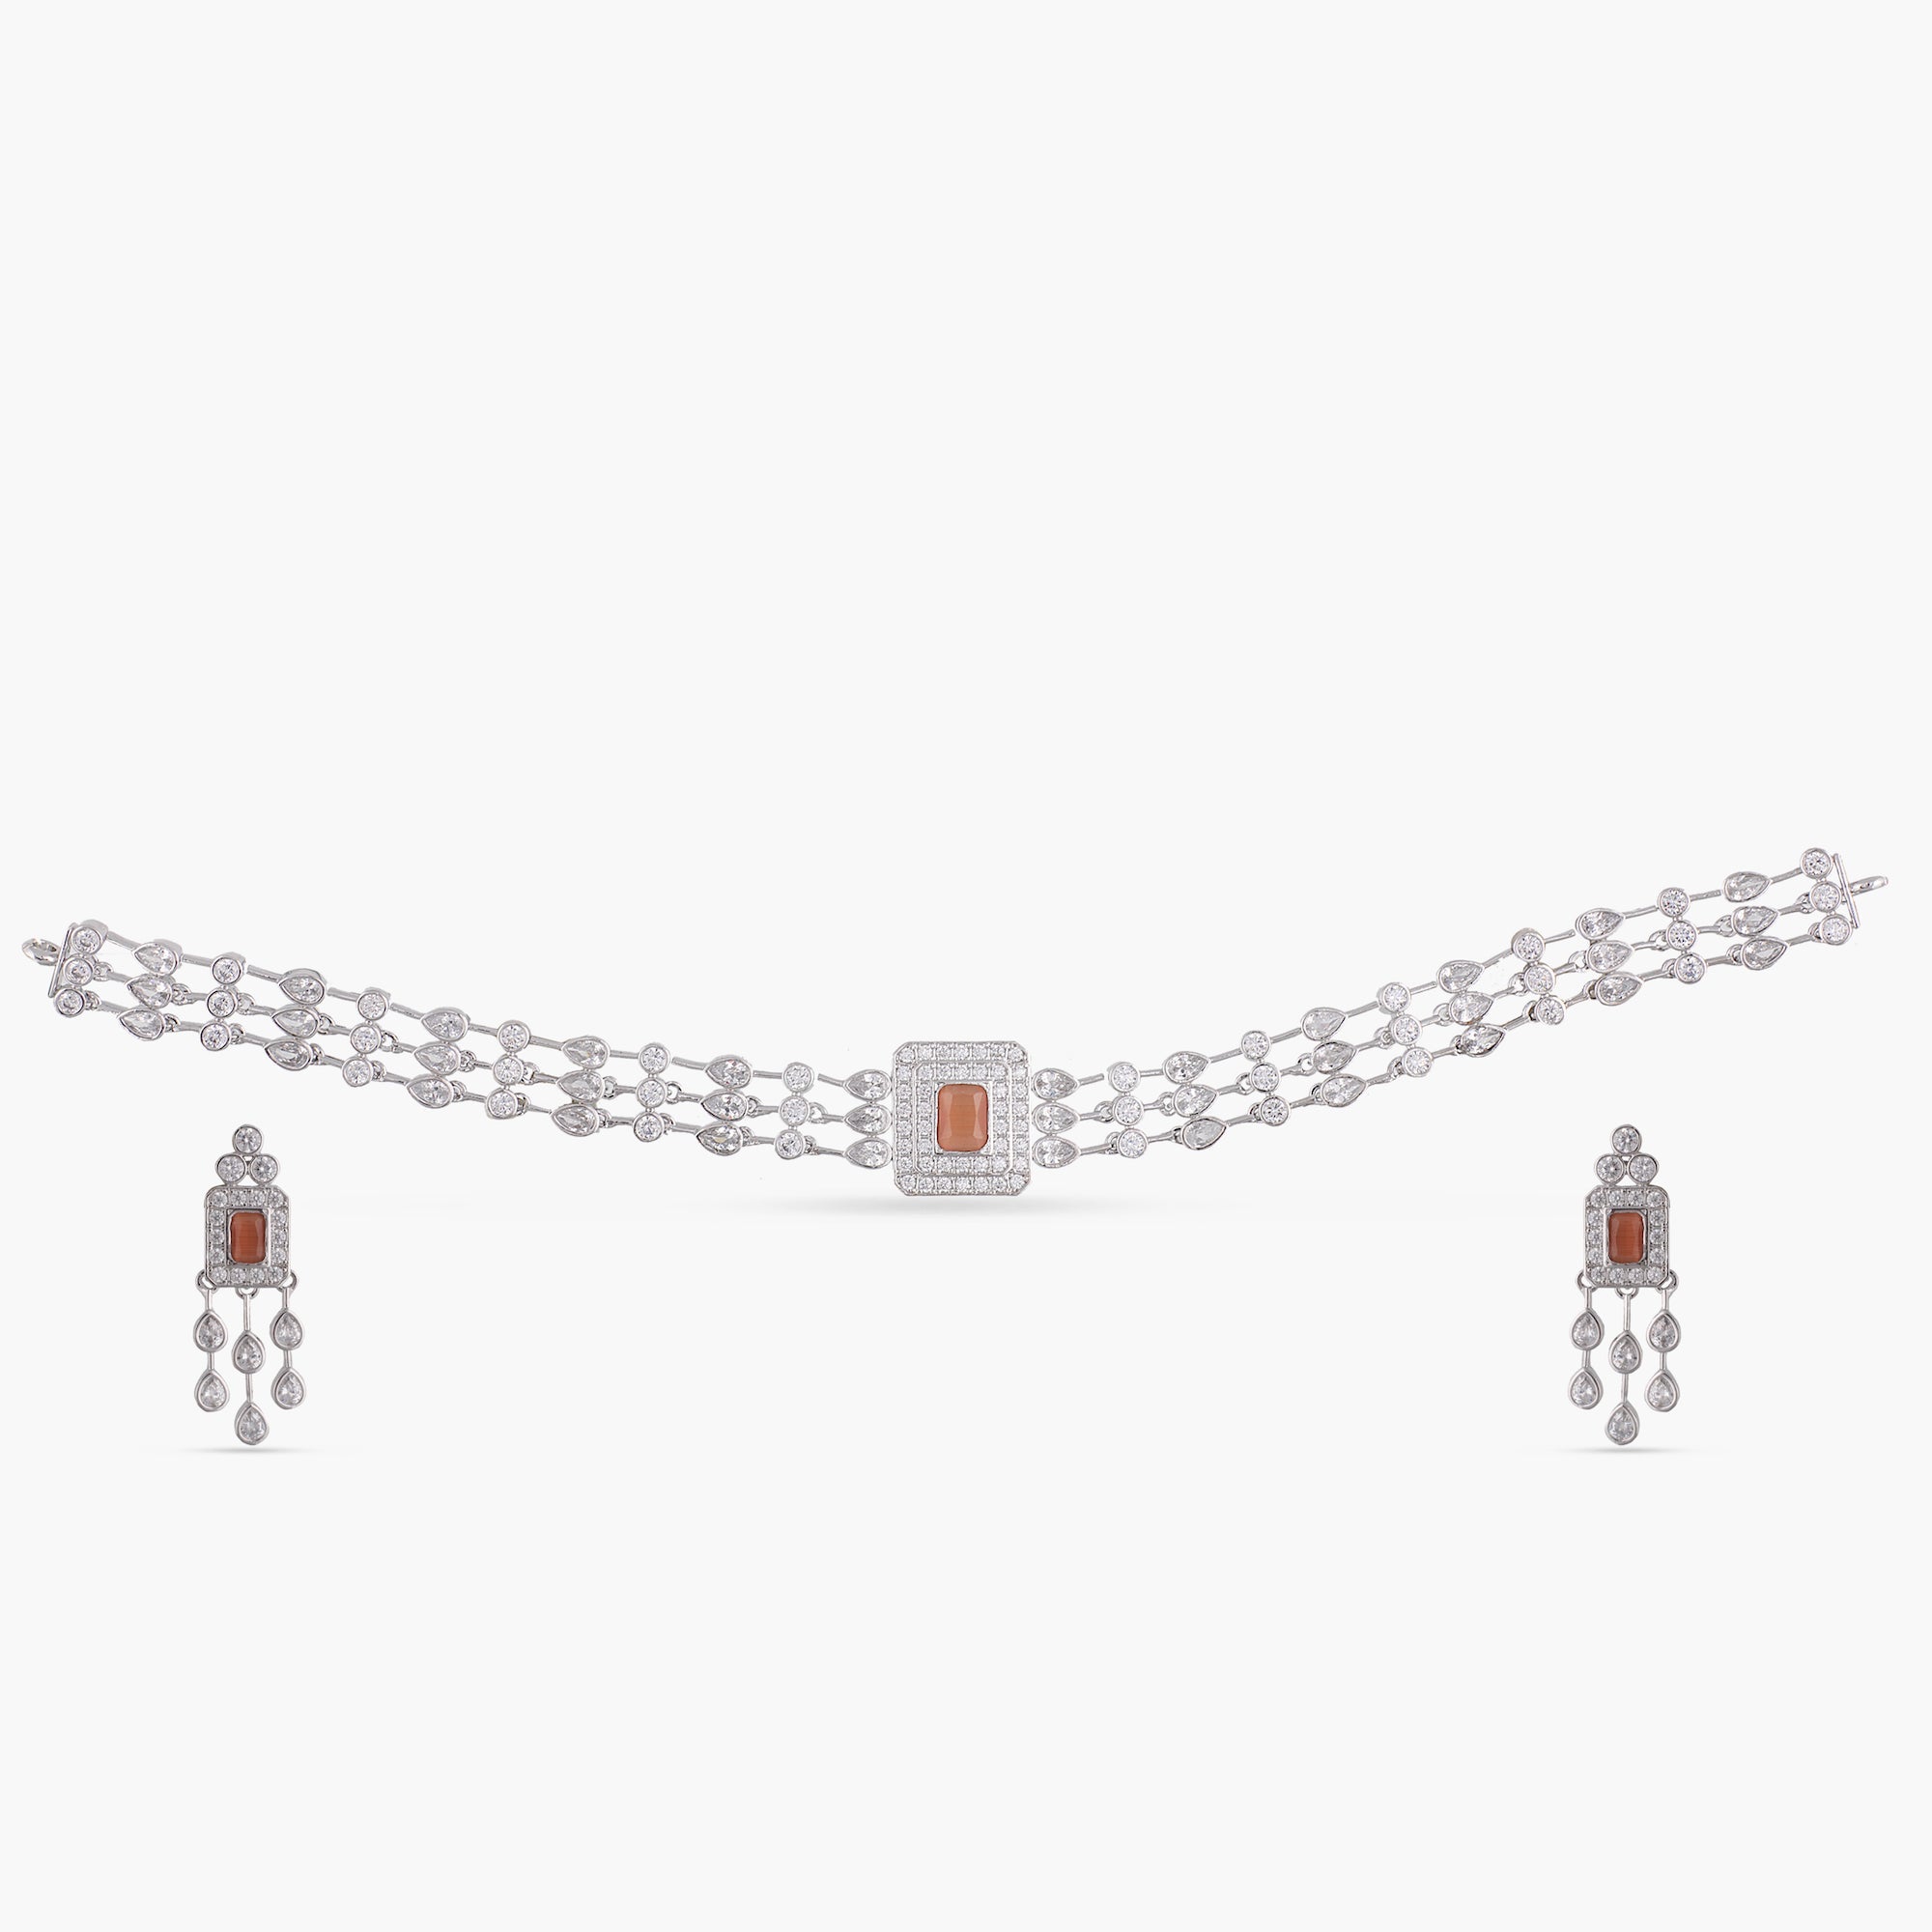 A picture of Indian artificial jewelry. It is a choker necklace and matching earrings set with Cubic Zirconia and red gemstones on a white background.